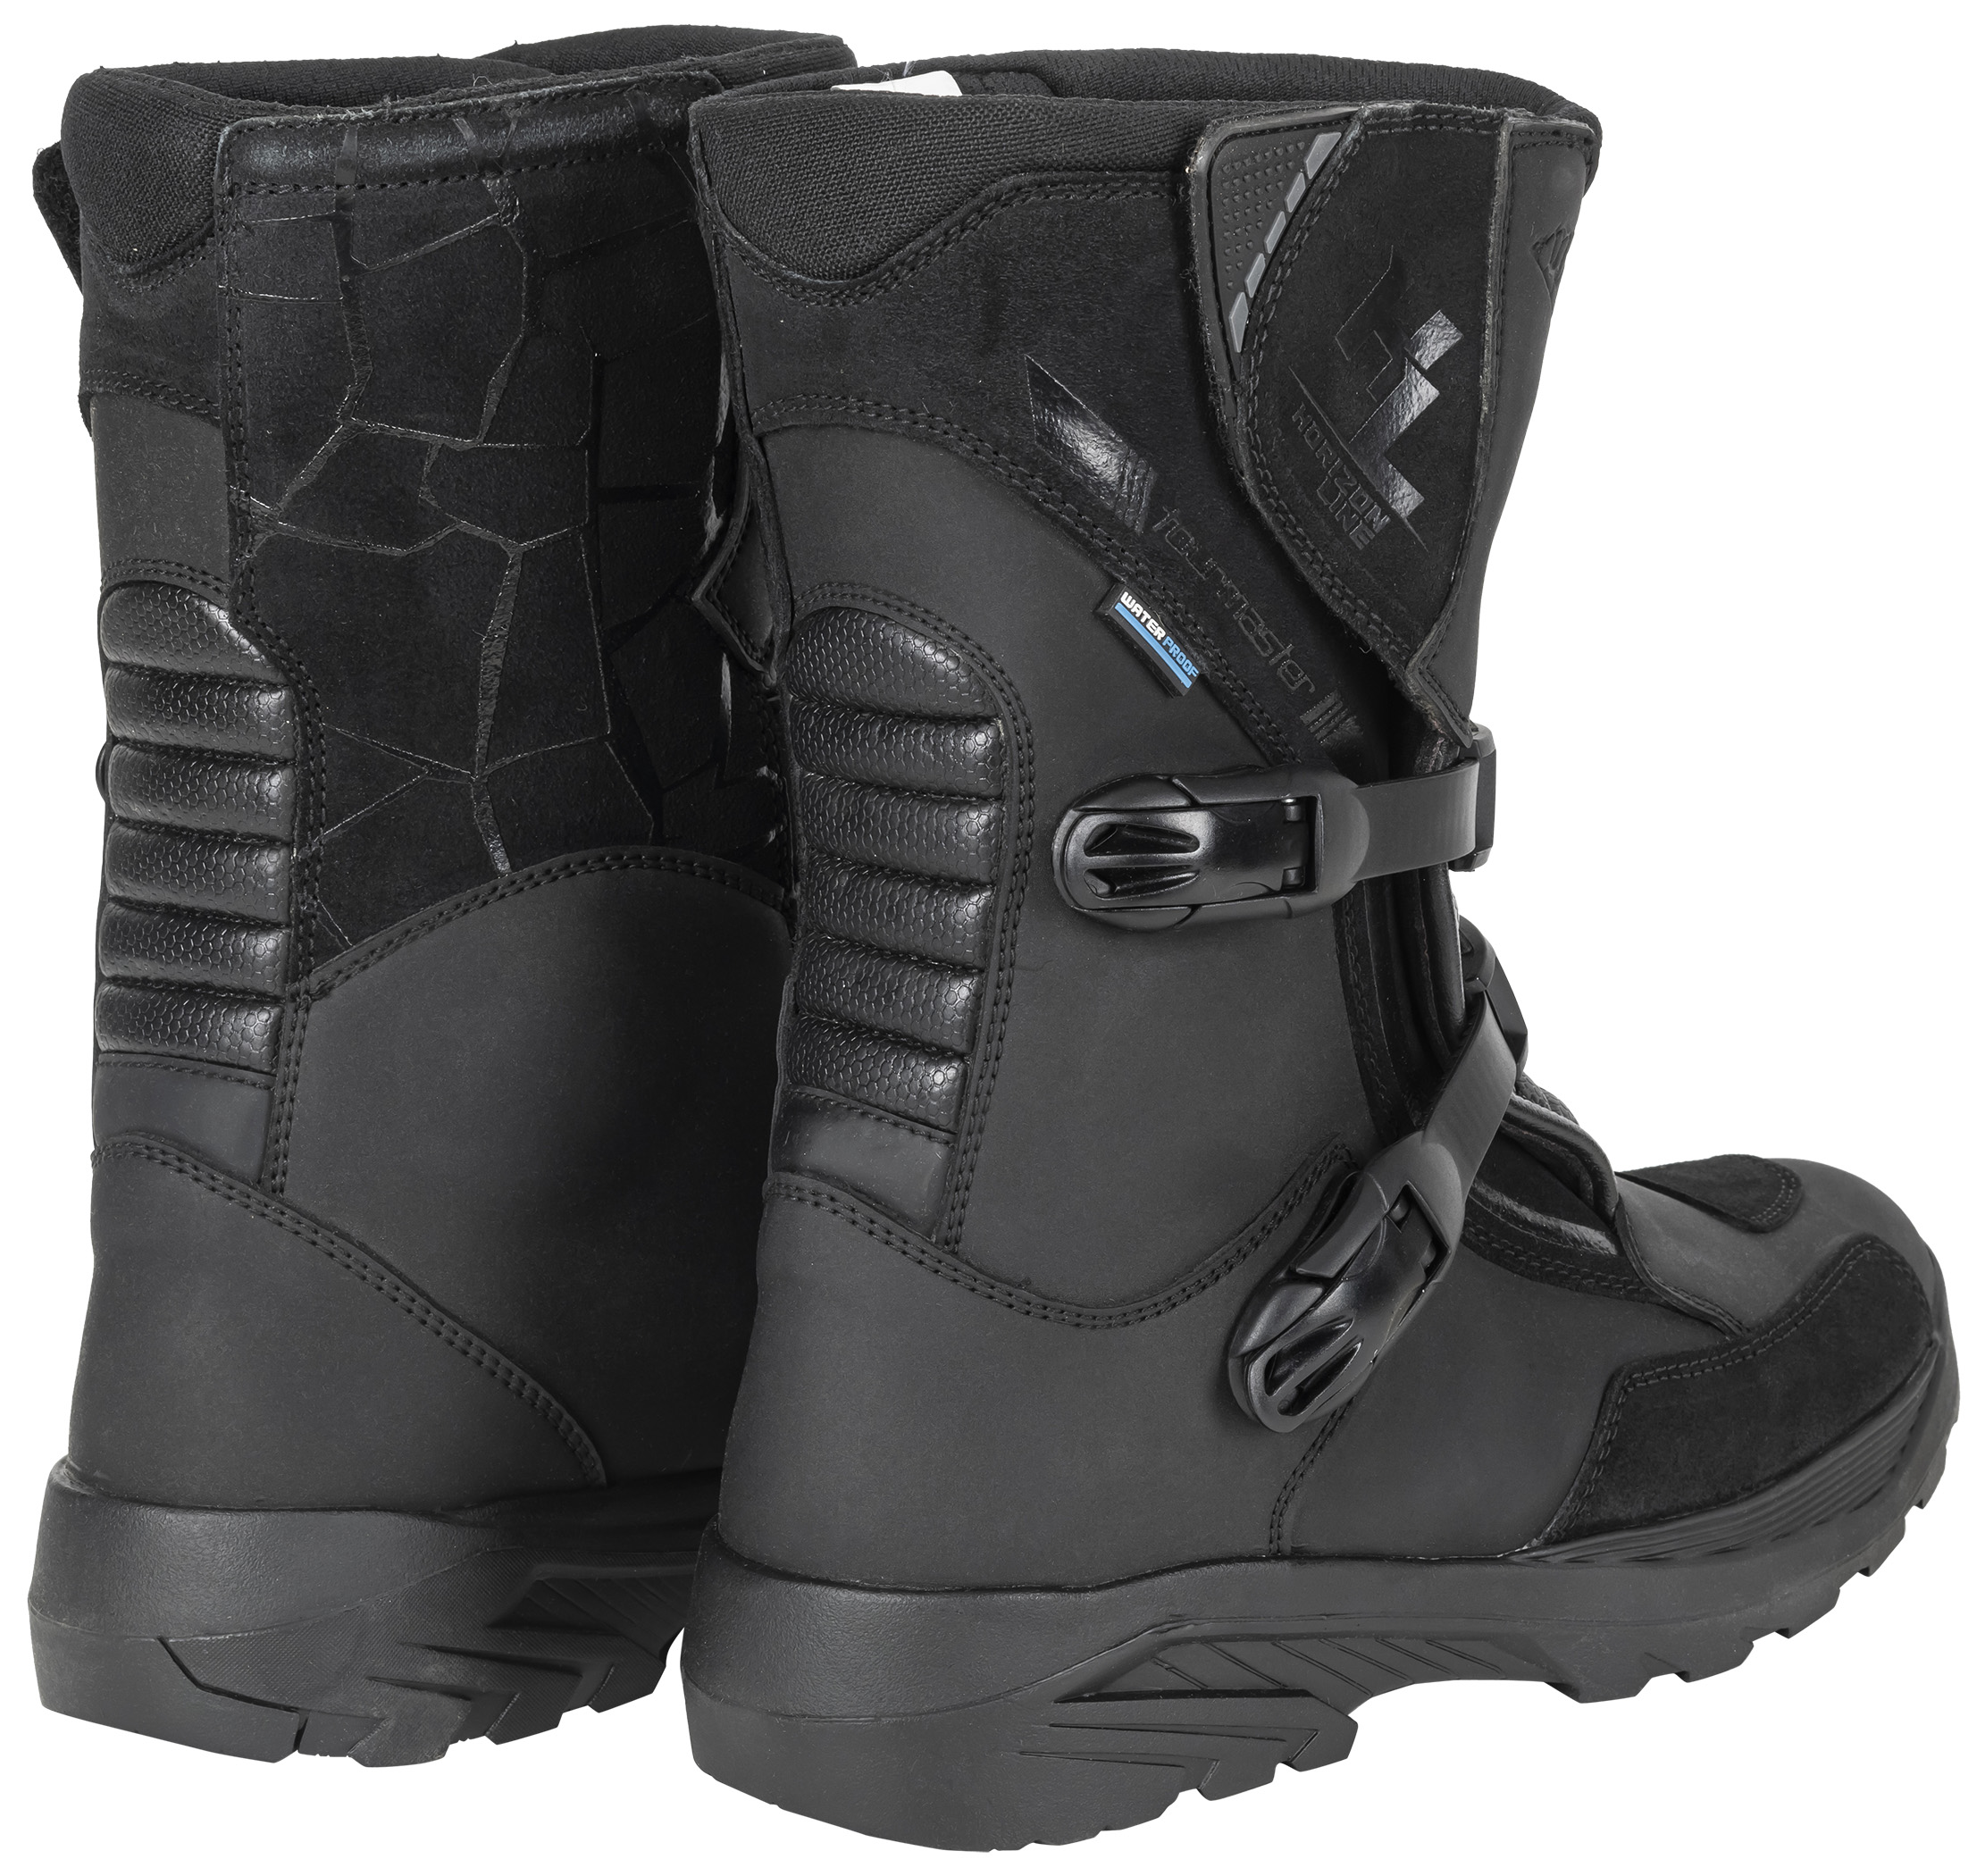 Black Trailblazer Adventure Motorcycle Boot Size 10 - Mid-Calf Waterproof Adventure Touring Boots - Click Image to Close